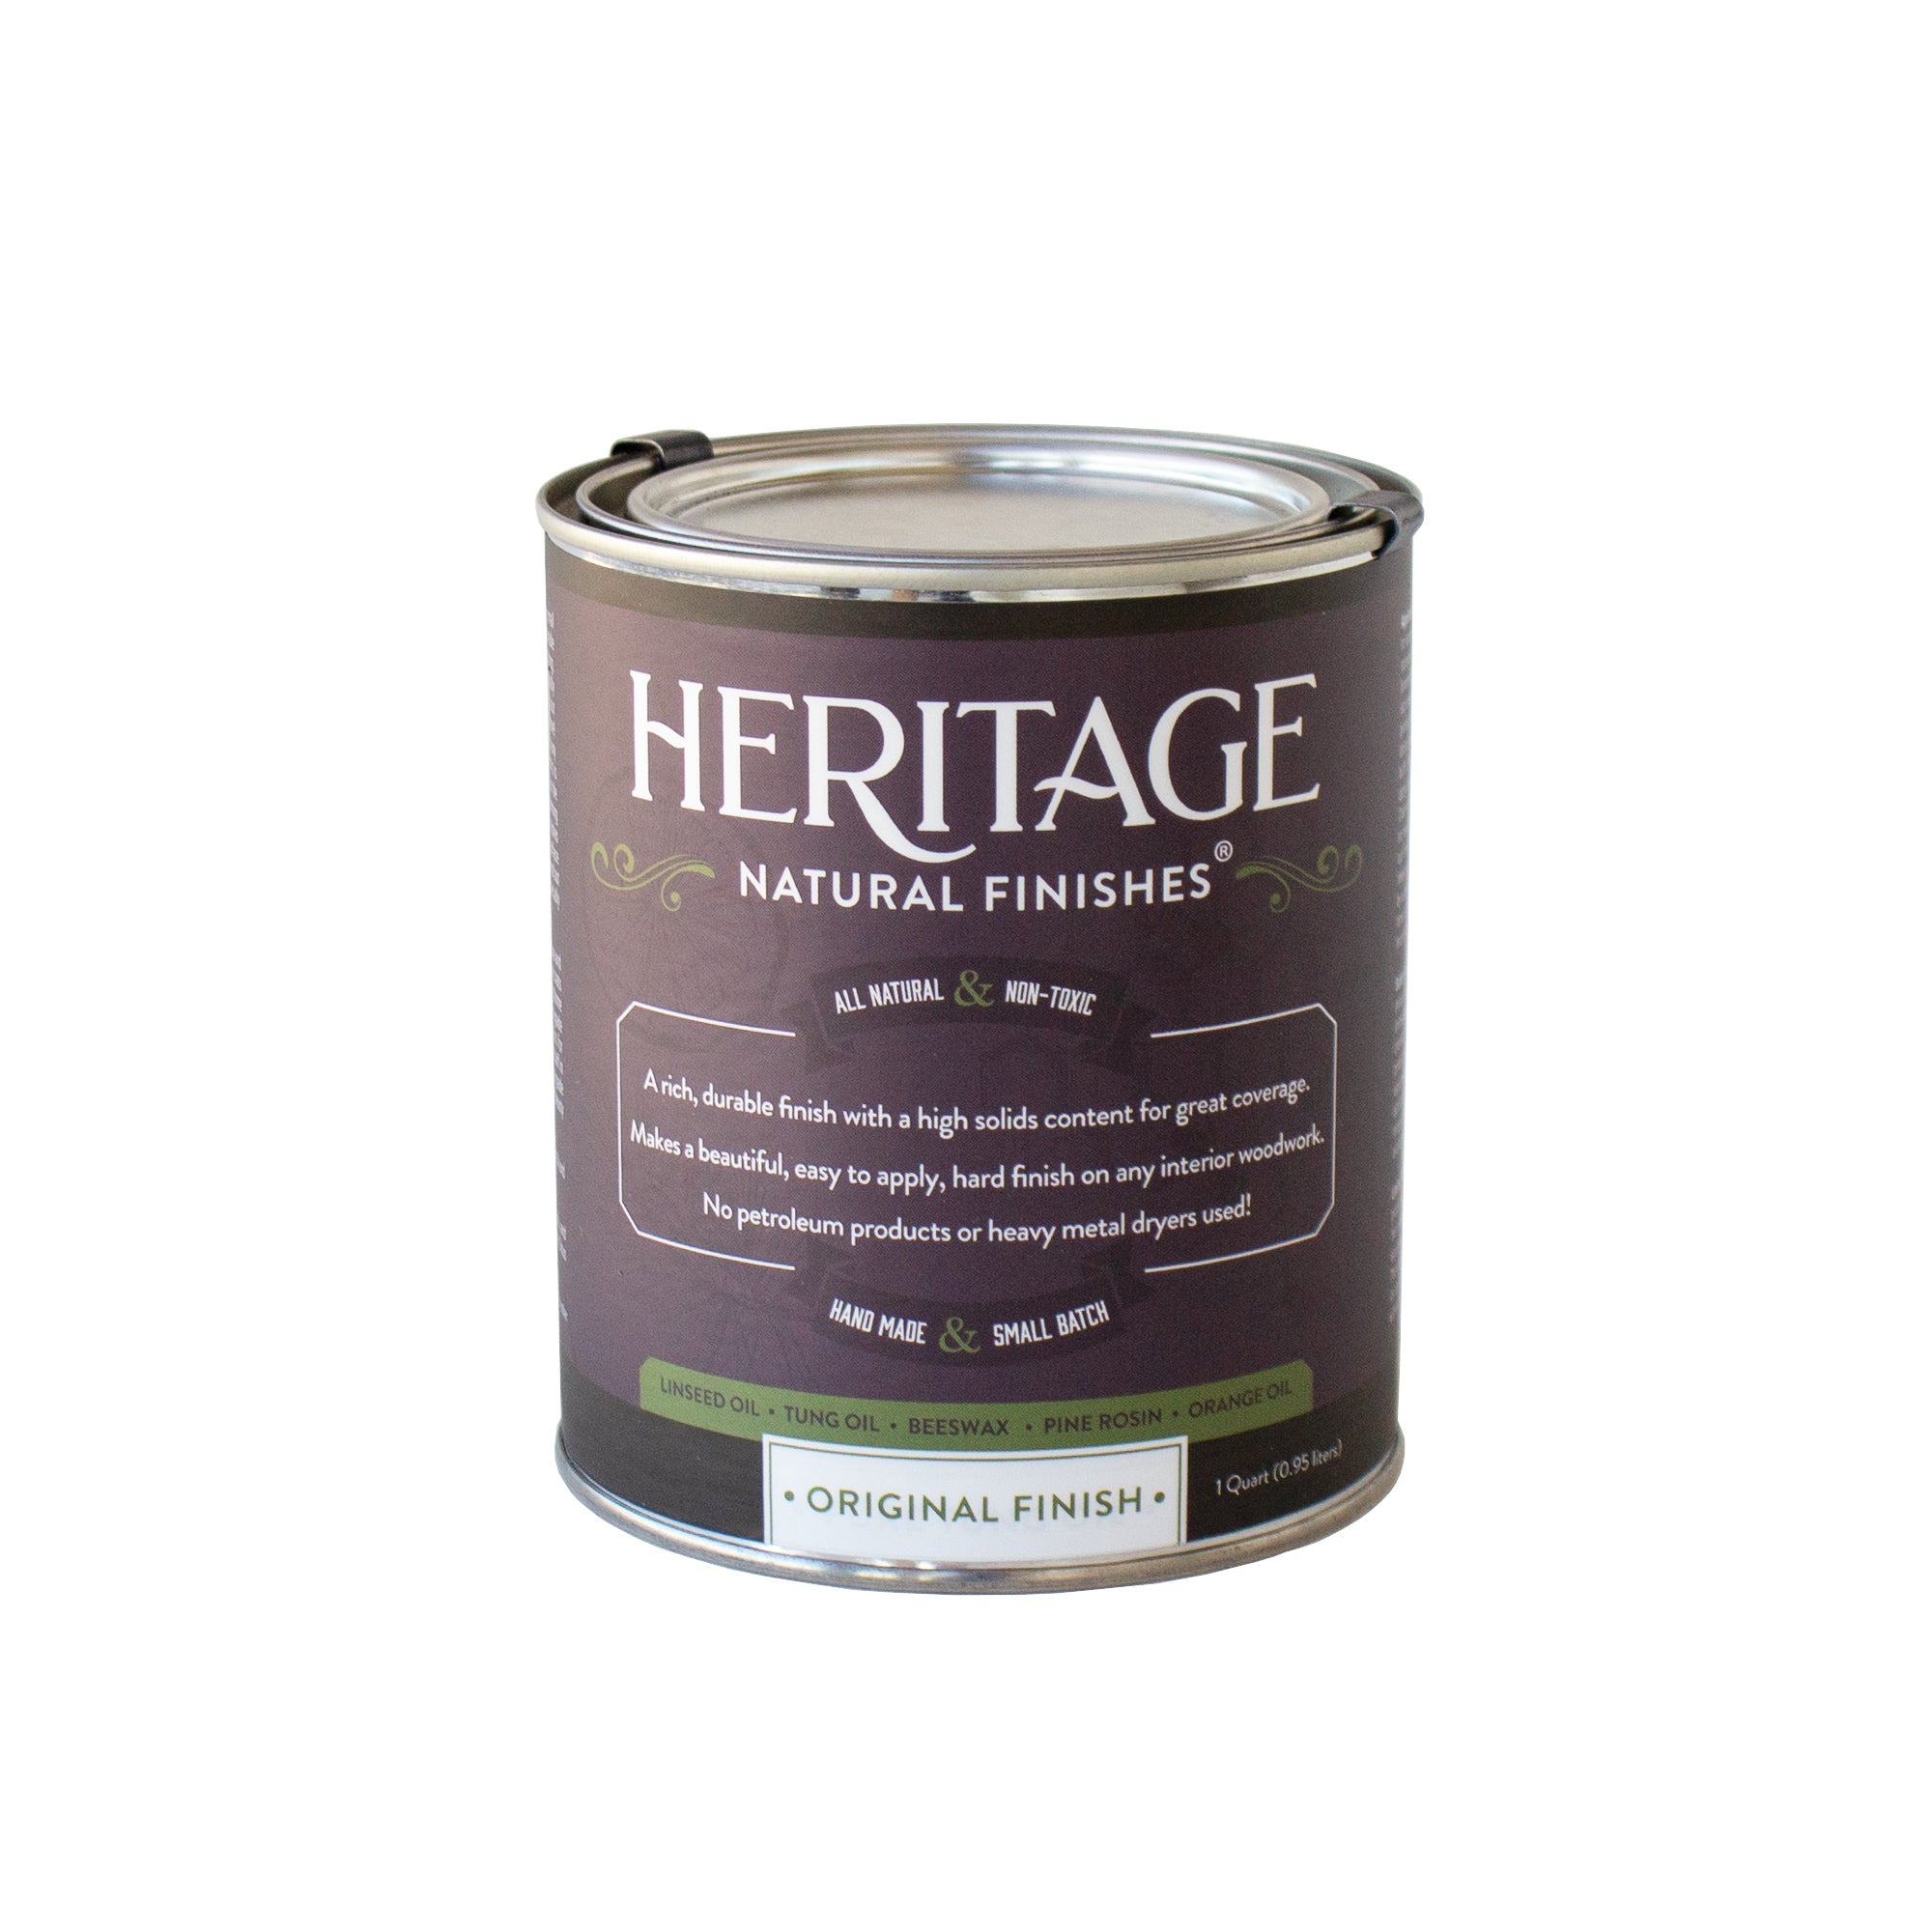 Heritage Natural Finishes Oil Select Interior or Exterior